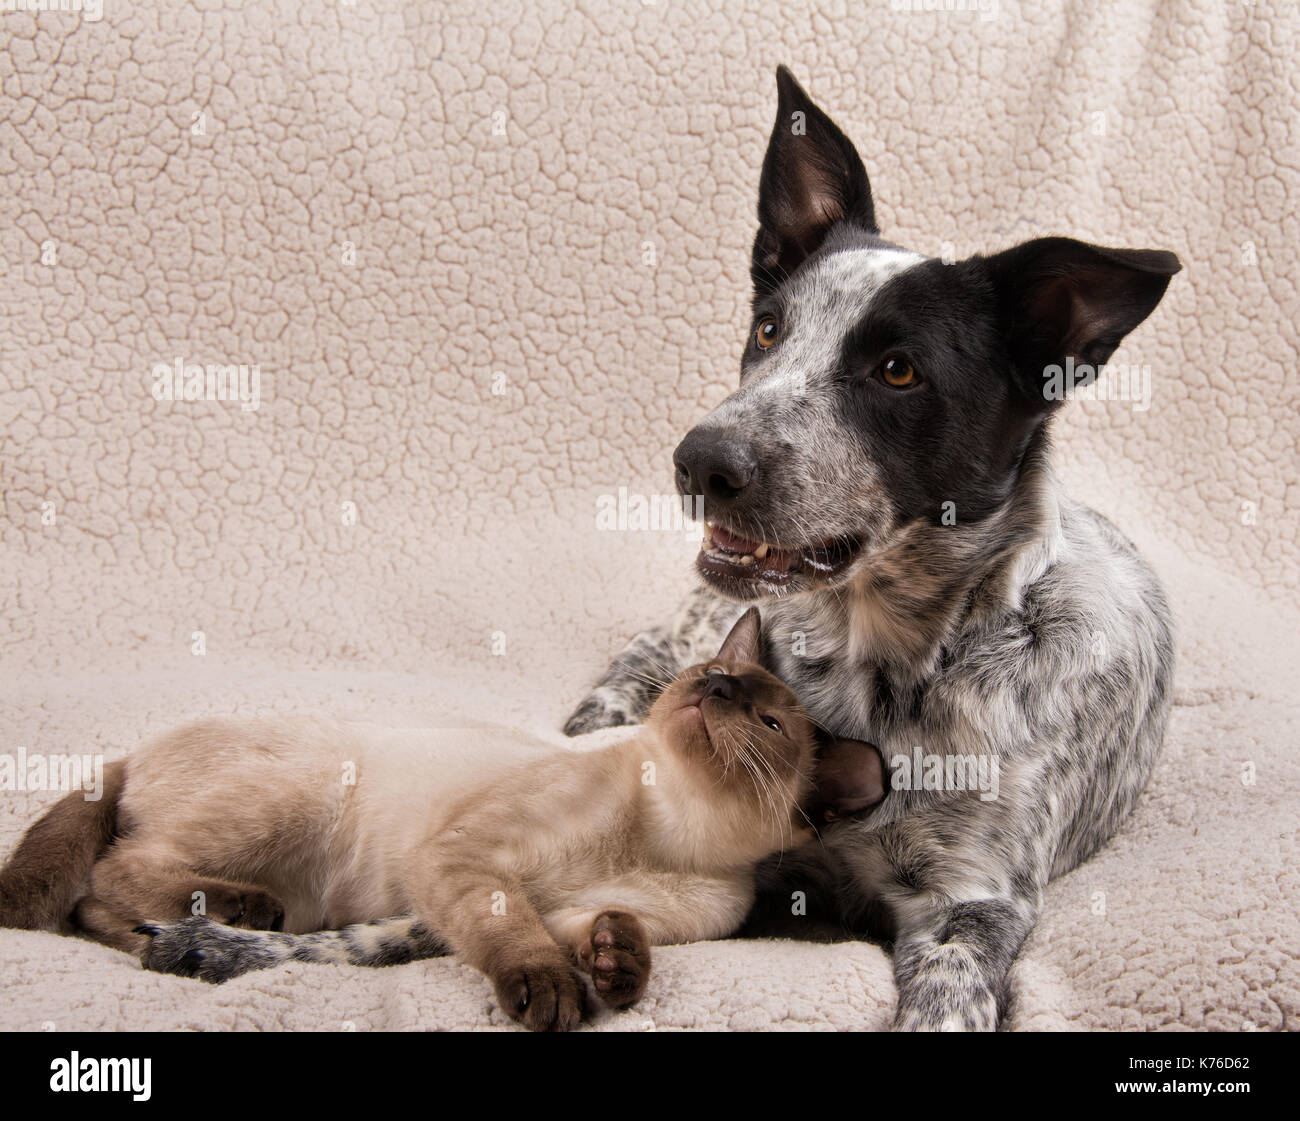 Young Siamese cat and a young dog lying together on a soft blanket, cat looking at the dog Stock Photo